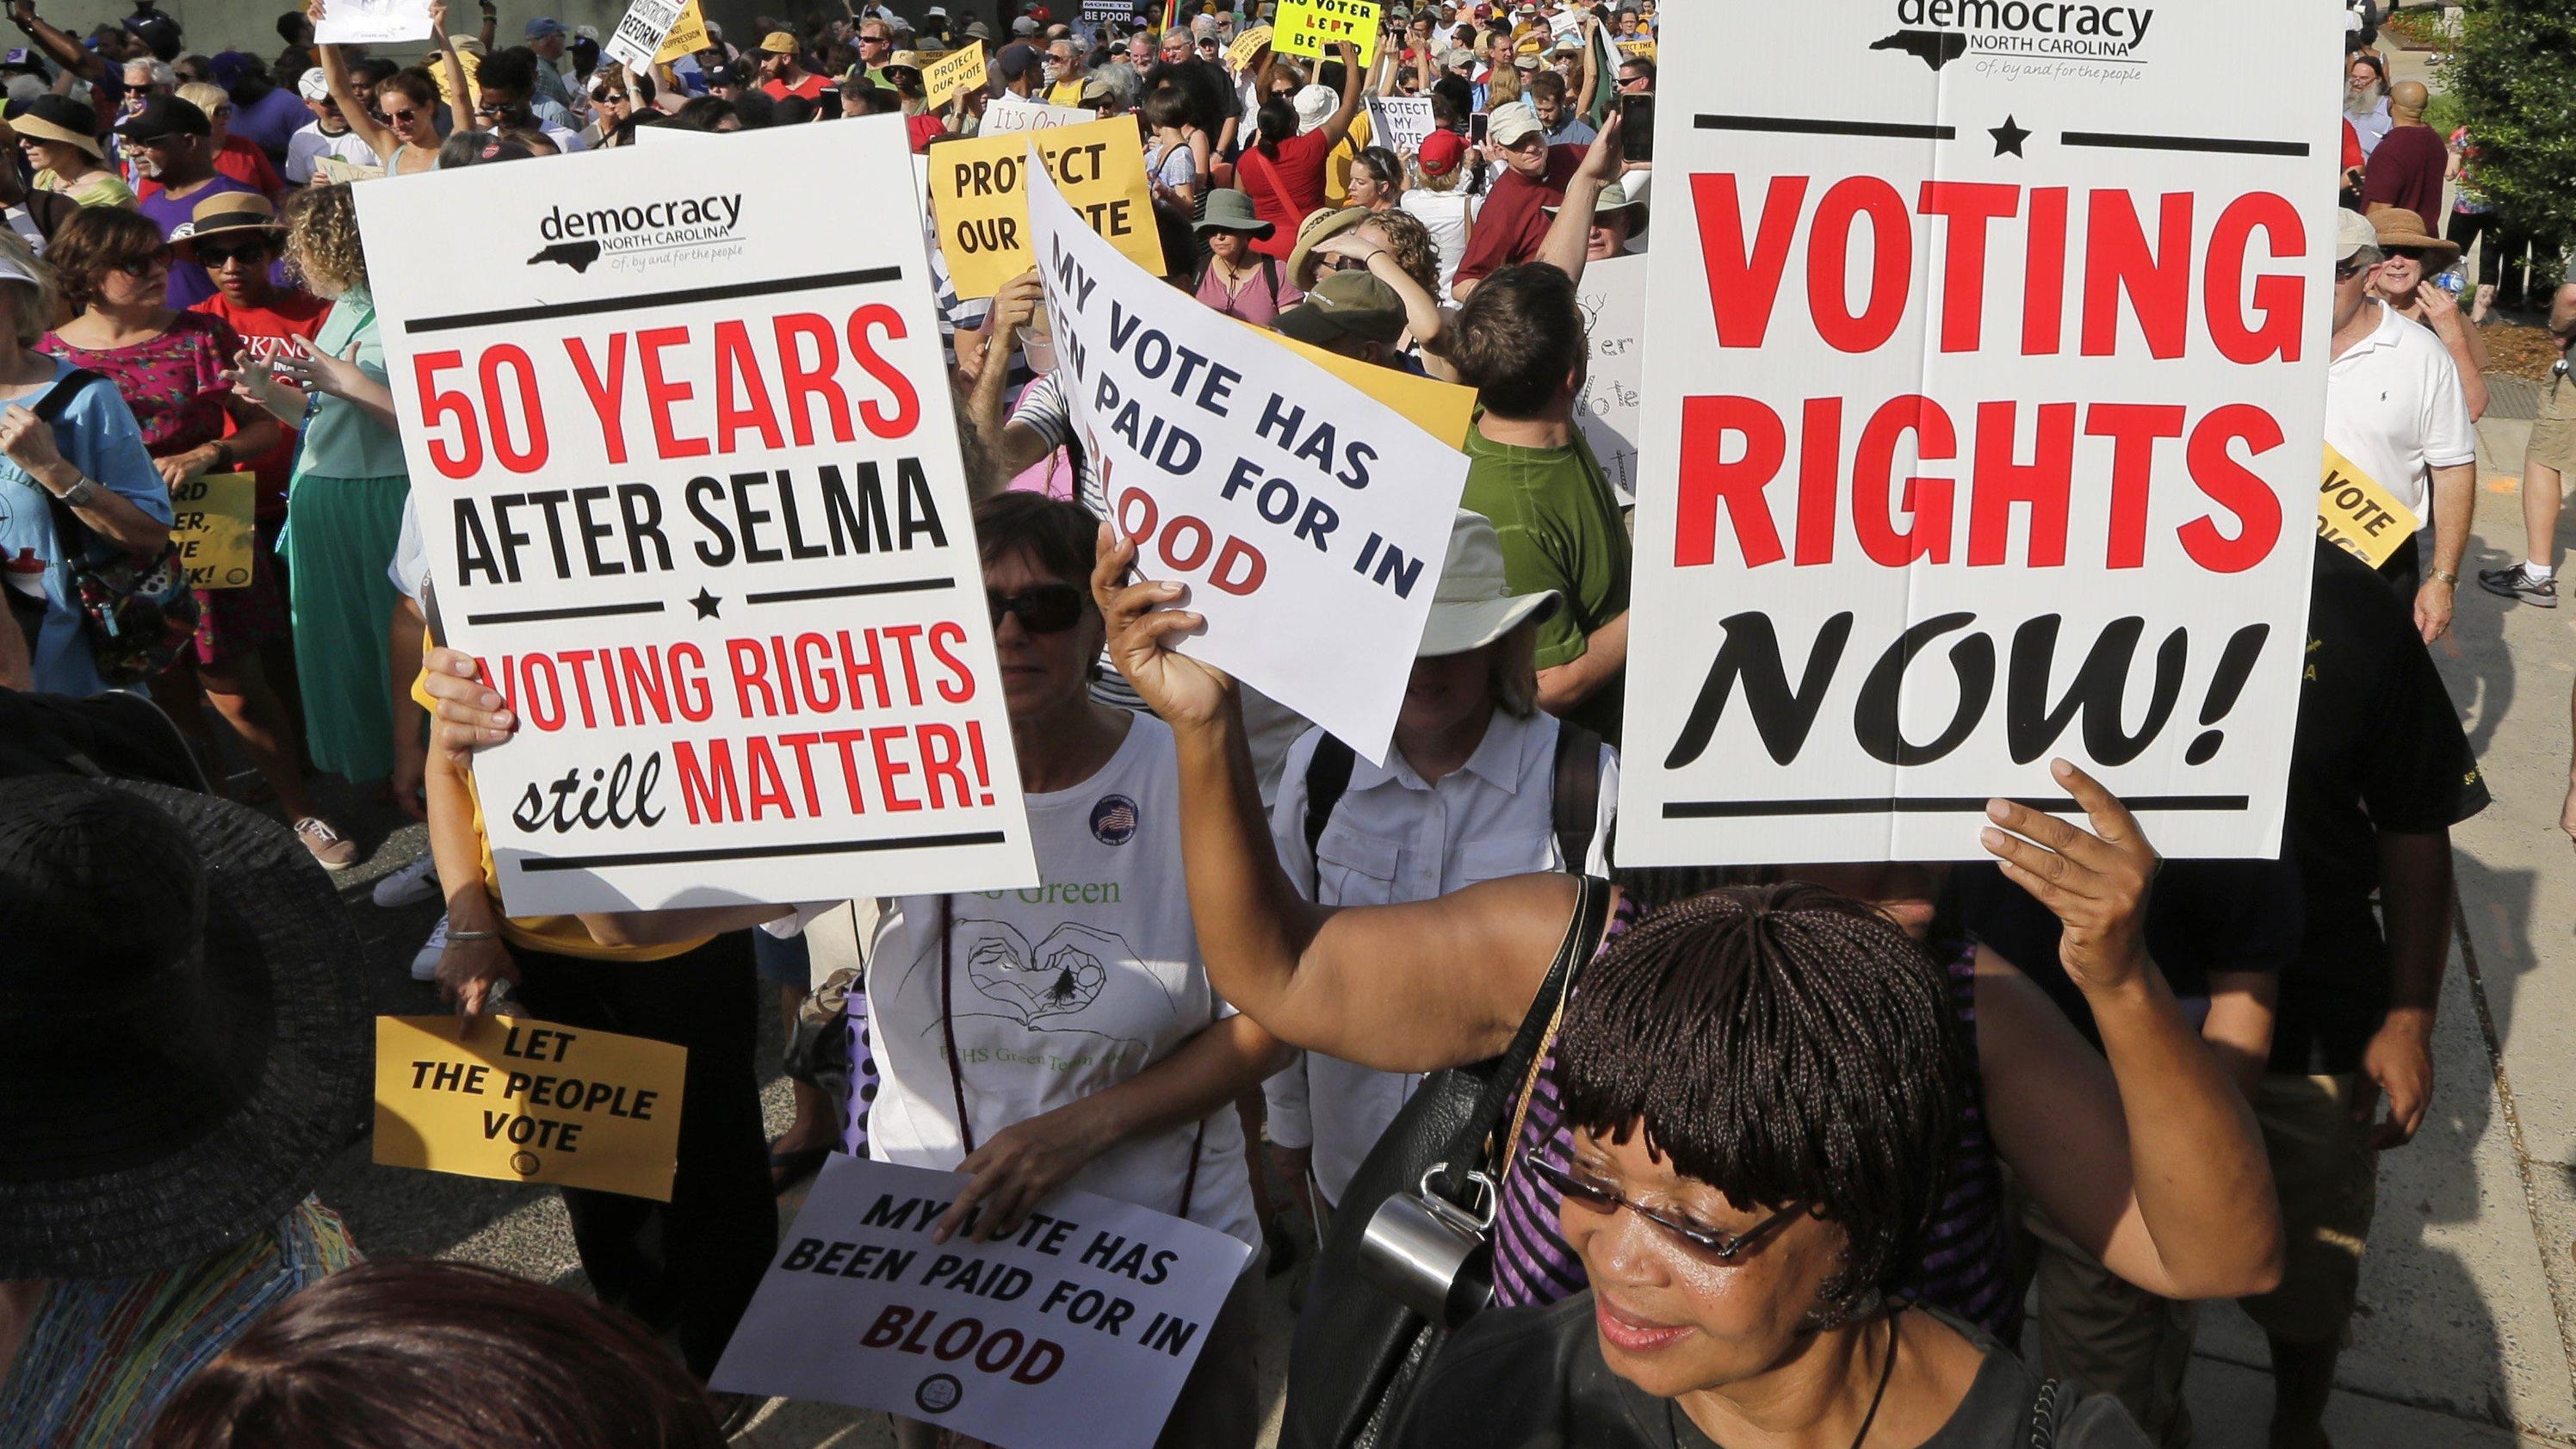 Why the Voting Rights Act matters so much today